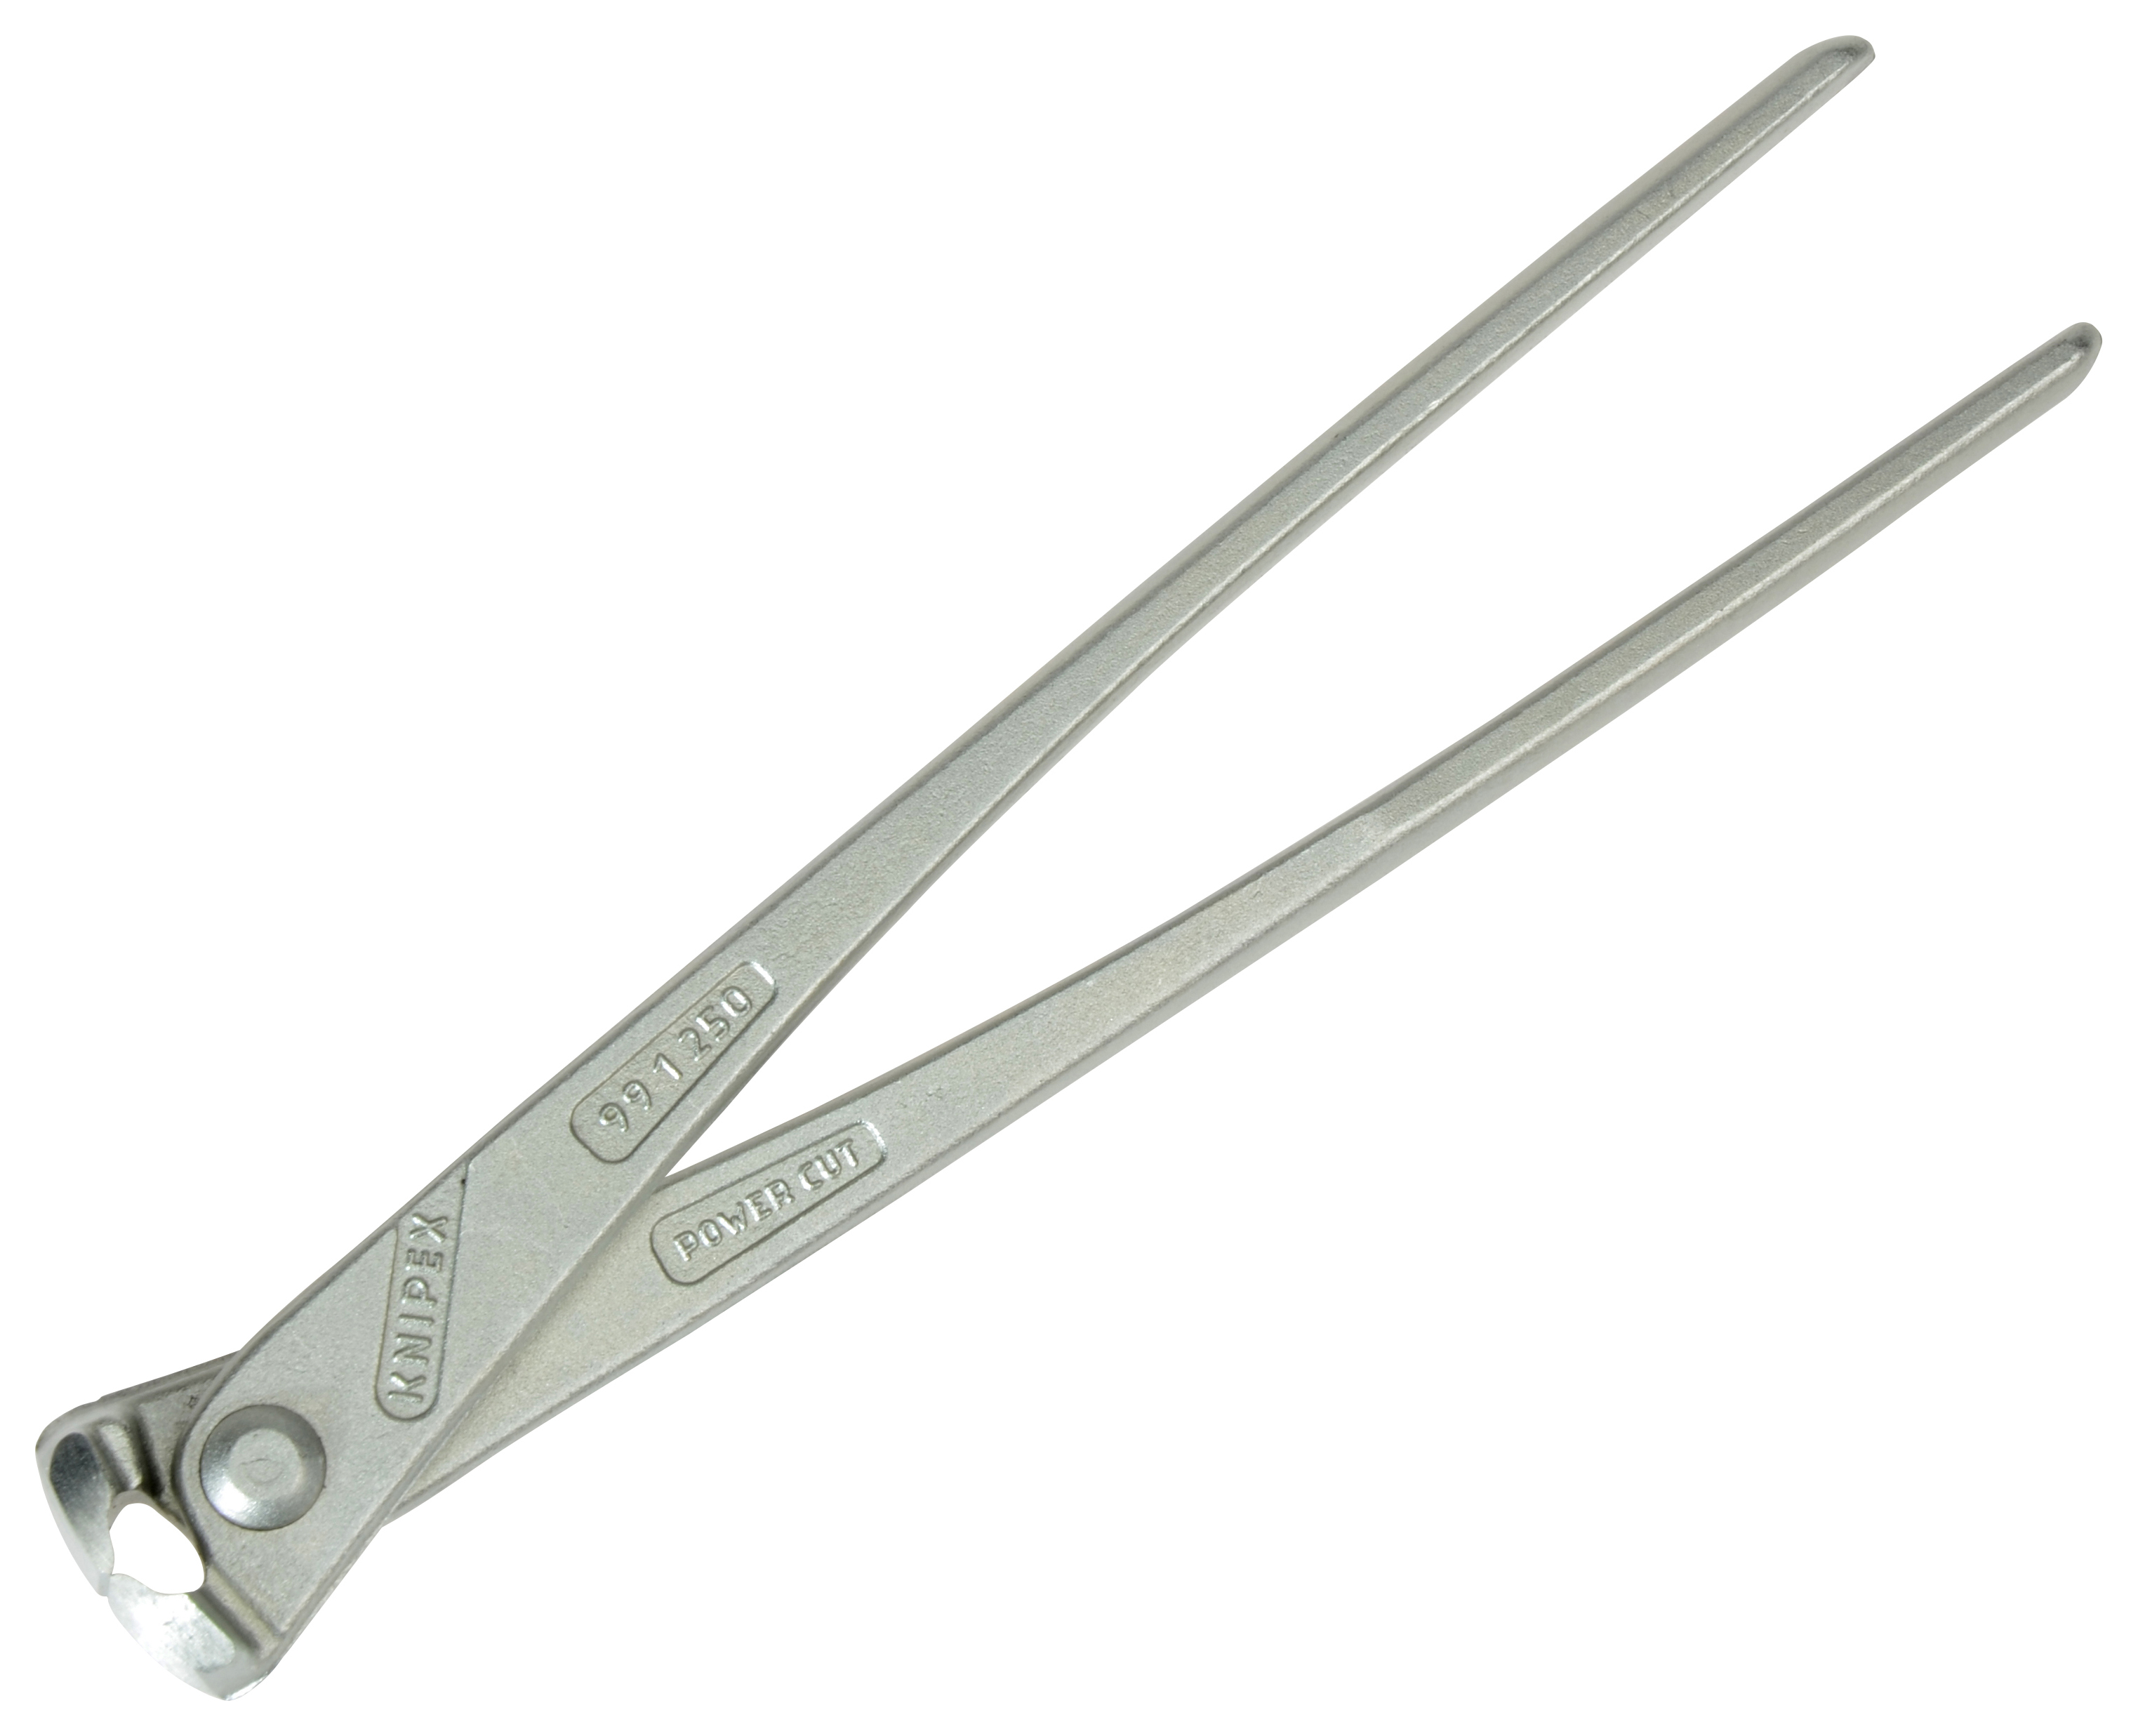 Knipex KPX9914250 10" Bright Zinc Plated High Leverage Concreter's Nippers - 250mm